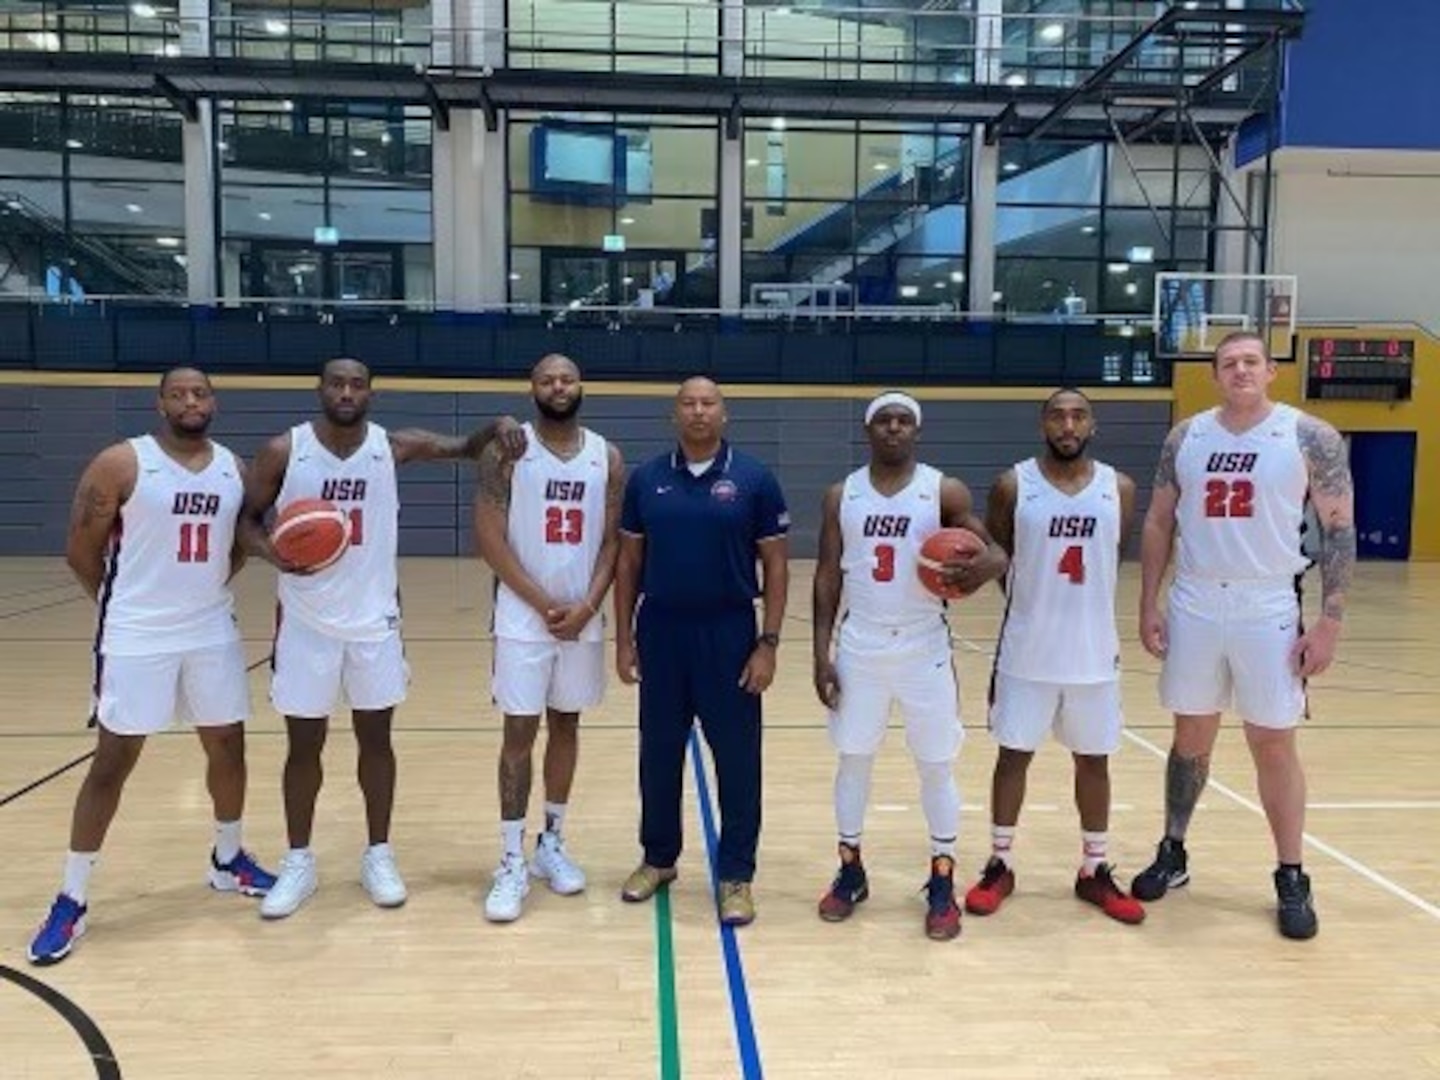 U.S. Coast Guard Cmdr. Micah Bonner, Director of Auxiliary Southern Region for the First Coast Guard District and head coach of the USA Armed Forces Men’s Basketball Team, poses with members of the team before playing in the Supreme Headquarters Allied Powers Europe (SHAPE) International Basketball Tournament (IBT) in Mons, Belgium, November 2021. The annual tournament brings teams from around the world together to a NATO installation for friendly competition and partnership. (U.S. Coast Guard courtesy photo)